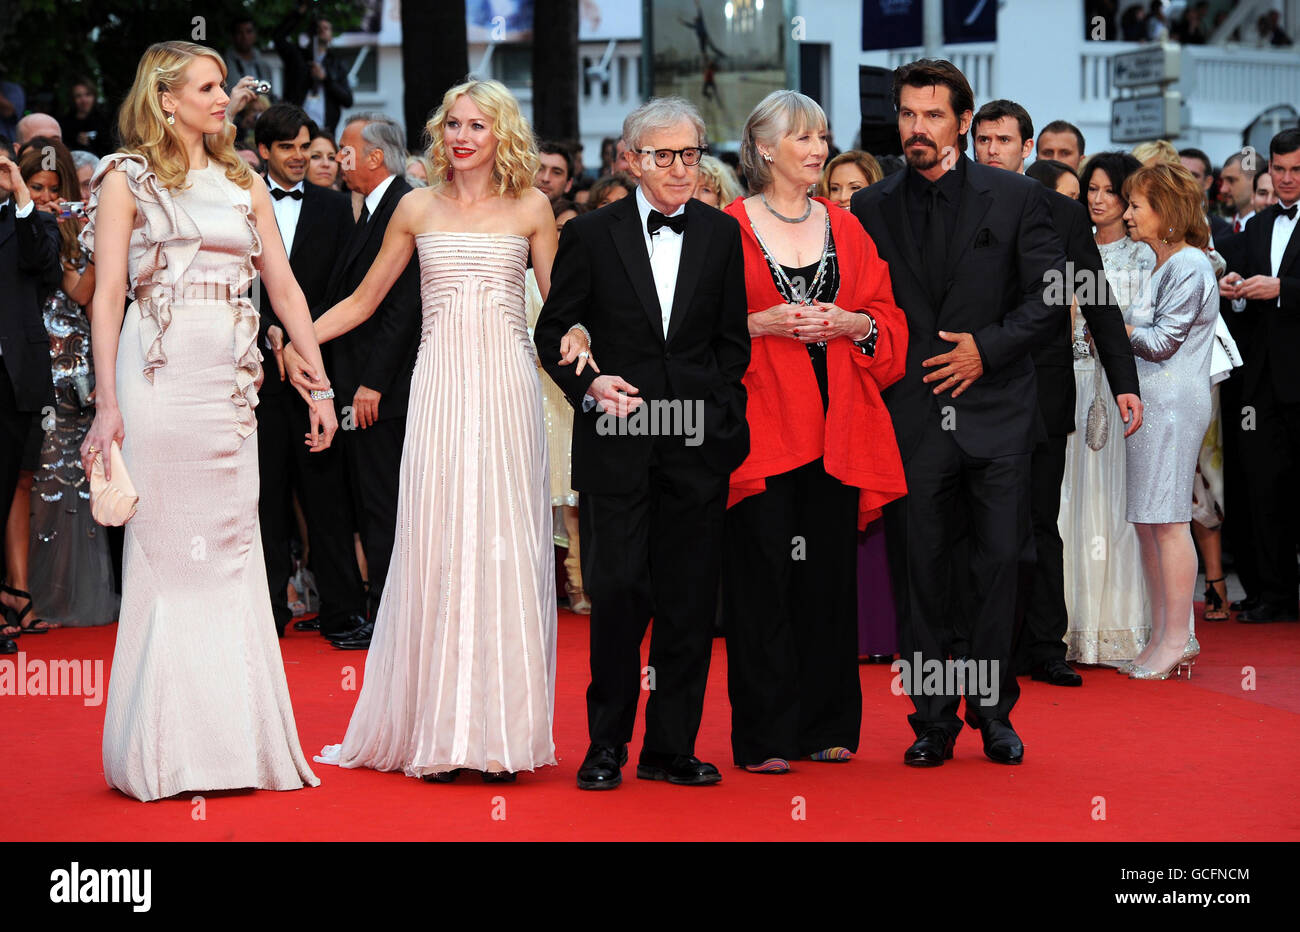 (Left to right) Lucy Punch, Naomi Watts, Woody Allen, Gemma Jones and Josh Brolin arrive for the premiere of You Will Meet A Tall Dark Stranger, at the 63rd Cannes Film Festival, France. Stock Photo